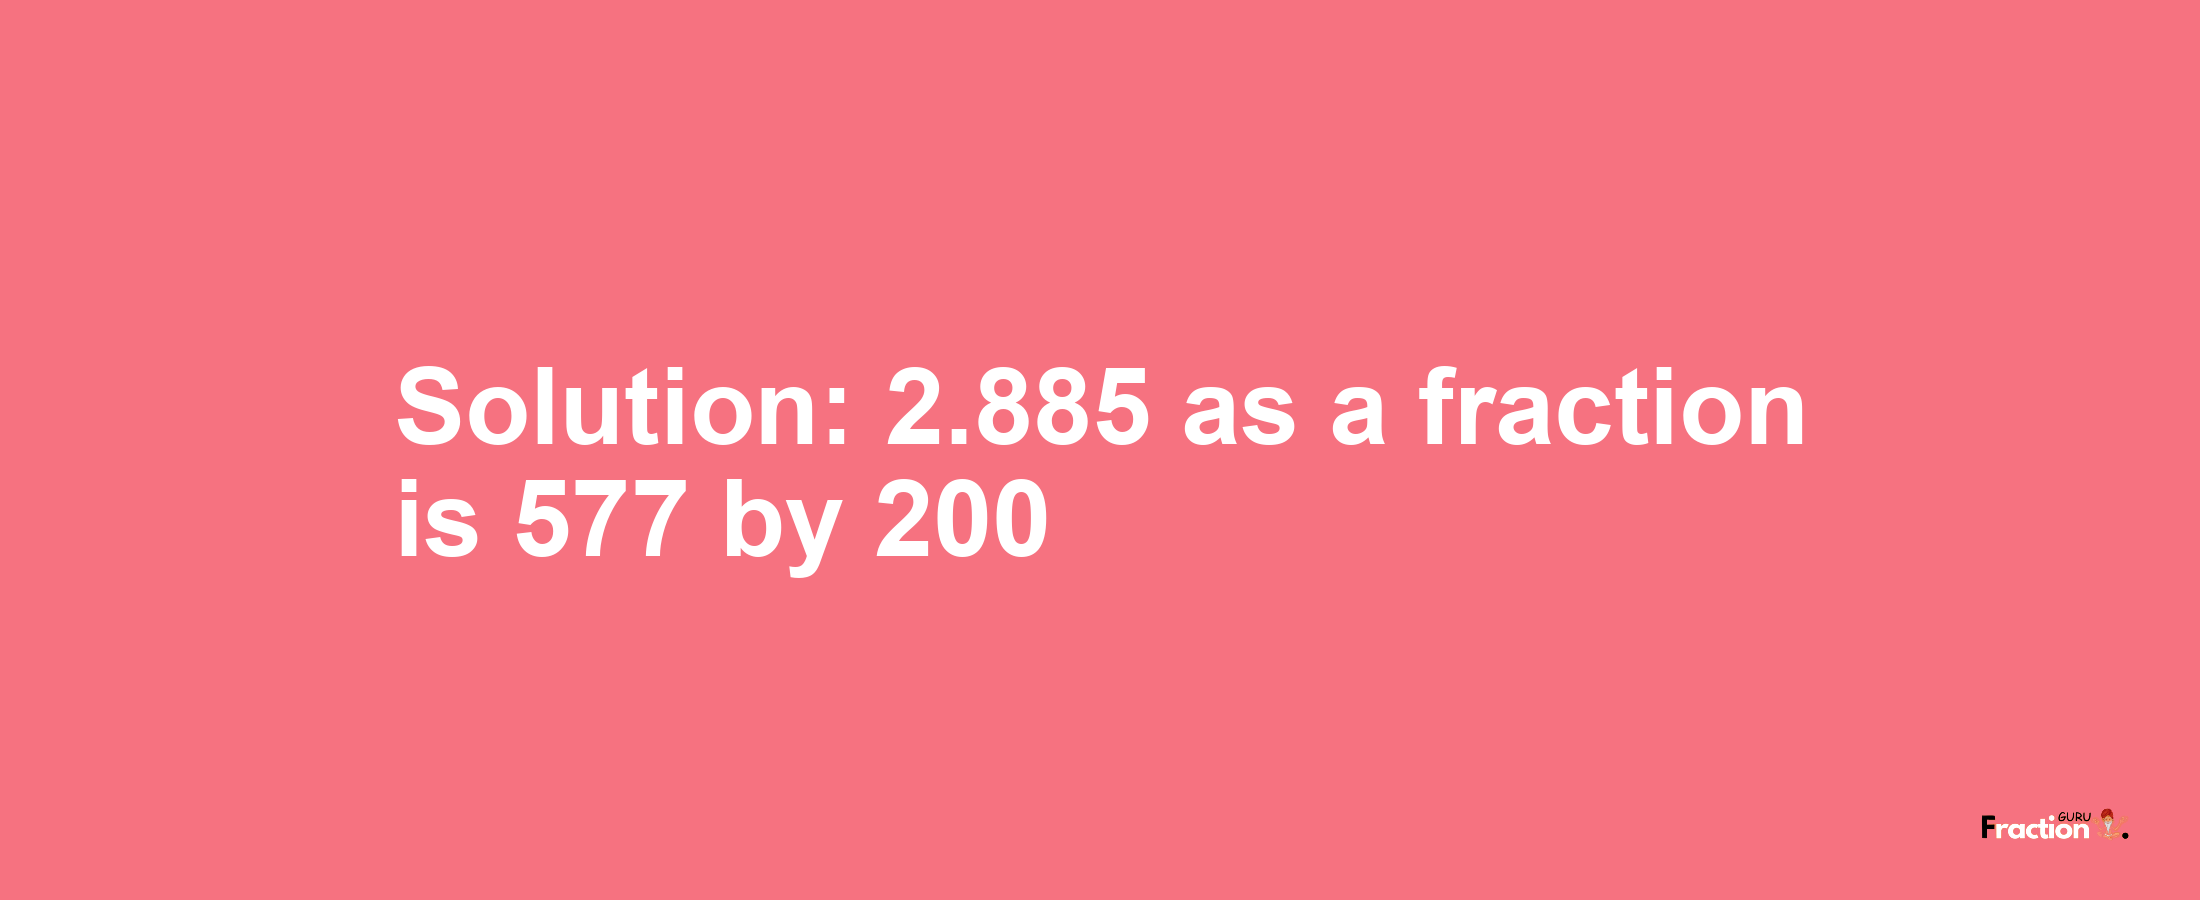 Solution:2.885 as a fraction is 577/200